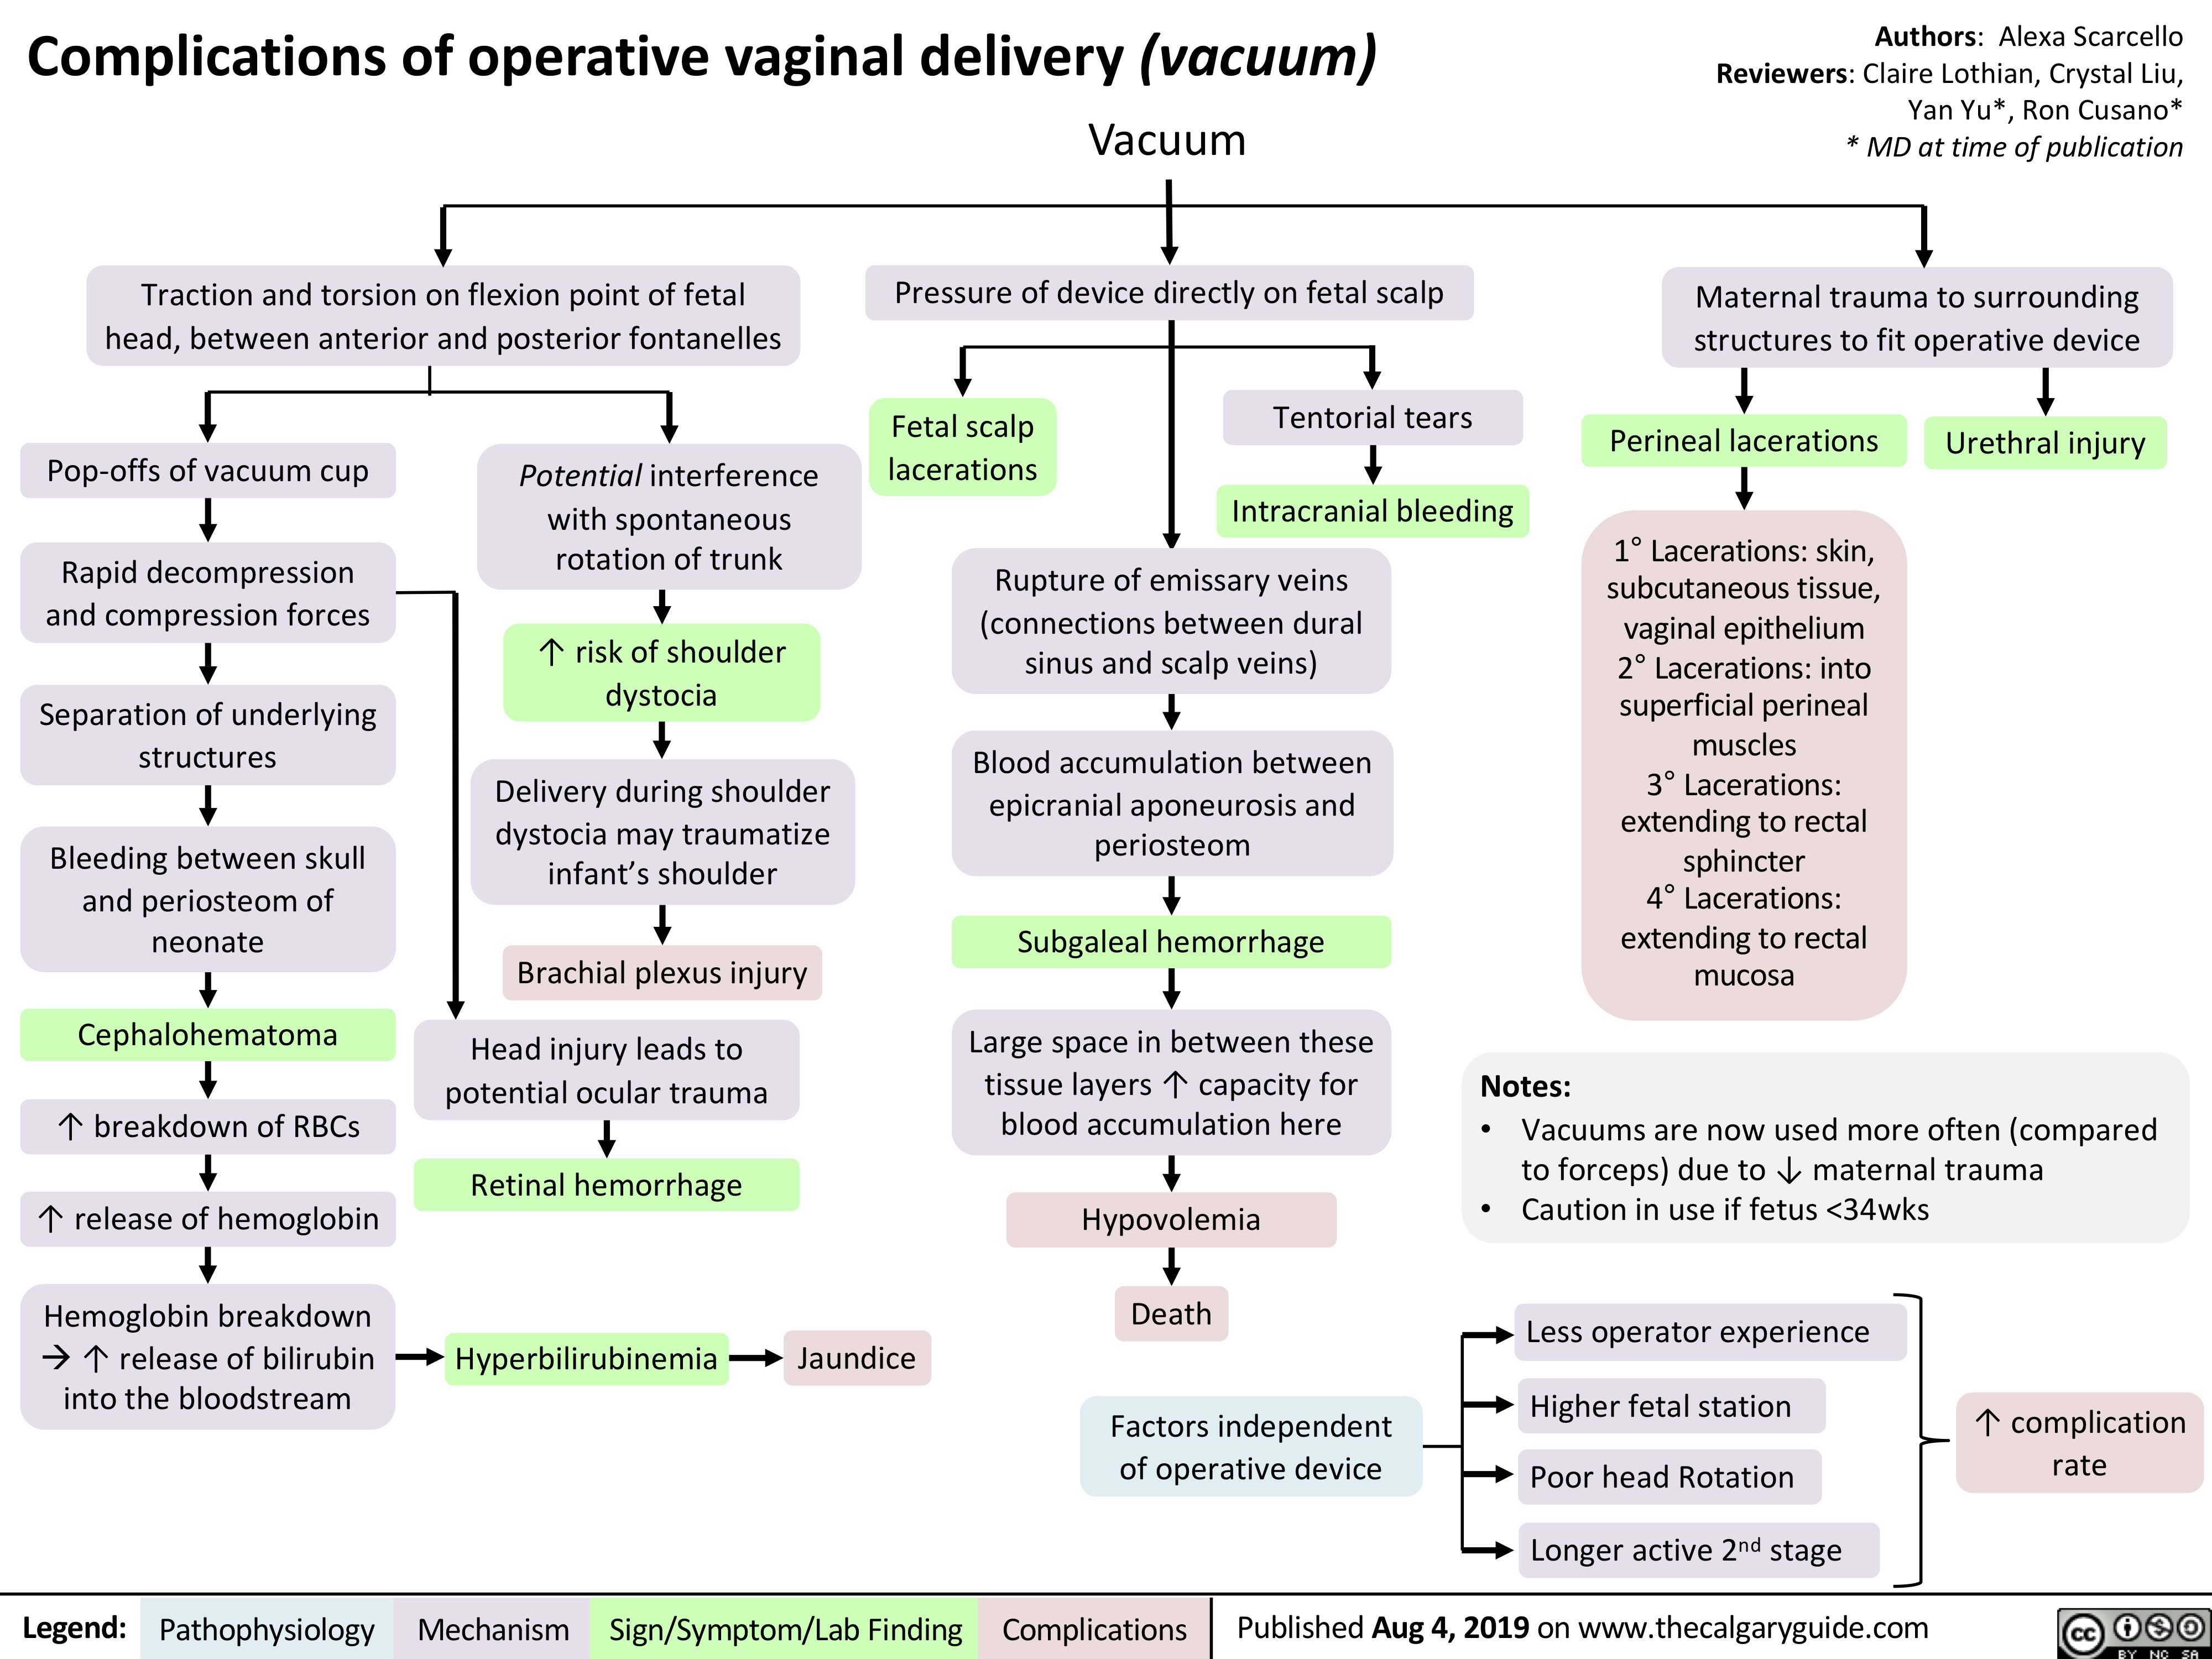 Complications of operative vaginal delivery (vacuum) Vacuum
Authors: Alexa Scarcello Reviewers: Claire Lothian, Crystal Liu, Yan Yu*, Ron Cusano* * MD at time of publication
Maternal trauma to surrounding structures to fit operative device
       Traction and torsion on flexion point of fetal head, between anterior and posterior fontanelles
Pressure of device directly on fetal scalp
               Pop-offs of vacuum cup
Rapid decompression and compression forces
Separation of underlying structures
Bleeding between skull and periosteom of neonate
Cephalohematoma
↑ breakdown of RBCs
↑ release of hemoglobin
Hemoglobin breakdown à↑ release of bilirubin into the bloodstream
Potential interference with spontaneous rotation of trunk
↑ risk of shoulder dystocia
Delivery during shoulder dystocia may traumatize infant’s shoulder
Brachial plexus injury
Head injury leads to potential ocular trauma
Retinal hemorrhage
Hyperbilirubinemia
Fetal scalp lacerations
Tentorial tears
Intracranial bleeding
Perineal lacerations
1° Lacerations: skin, subcutaneous tissue, vaginal epithelium 2° Lacerations: into superficial perineal muscles
3° Lacerations: extending to rectal sphincter
4° Lacerations: extending to rectal mucosa
Urethral injury
     Rupture of emissary veins (connections between dural sinus and scalp veins)
Blood accumulation between epicranial aponeurosis and periosteom
Subgaleal hemorrhage
Large space in between these tissue layers ↑ capacity for blood accumulation here
Hypovolemia Death
Factors independent of operative device
Notes:
                        • •
Vacuums are now used more often (compared to forceps) due to ↓ maternal trauma
Caution in use if fetus <34wks
                Jaundice
Less operator experience Higher fetal station
Poor head Rotation Longer active 2nd stage
     ↑ complication rate
   Legend:
 Pathophysiology
Mechanism
Sign/Symptom/Lab Finding
  Complications
Published Aug 4, 2019 on www.thecalgaryguide.com
    